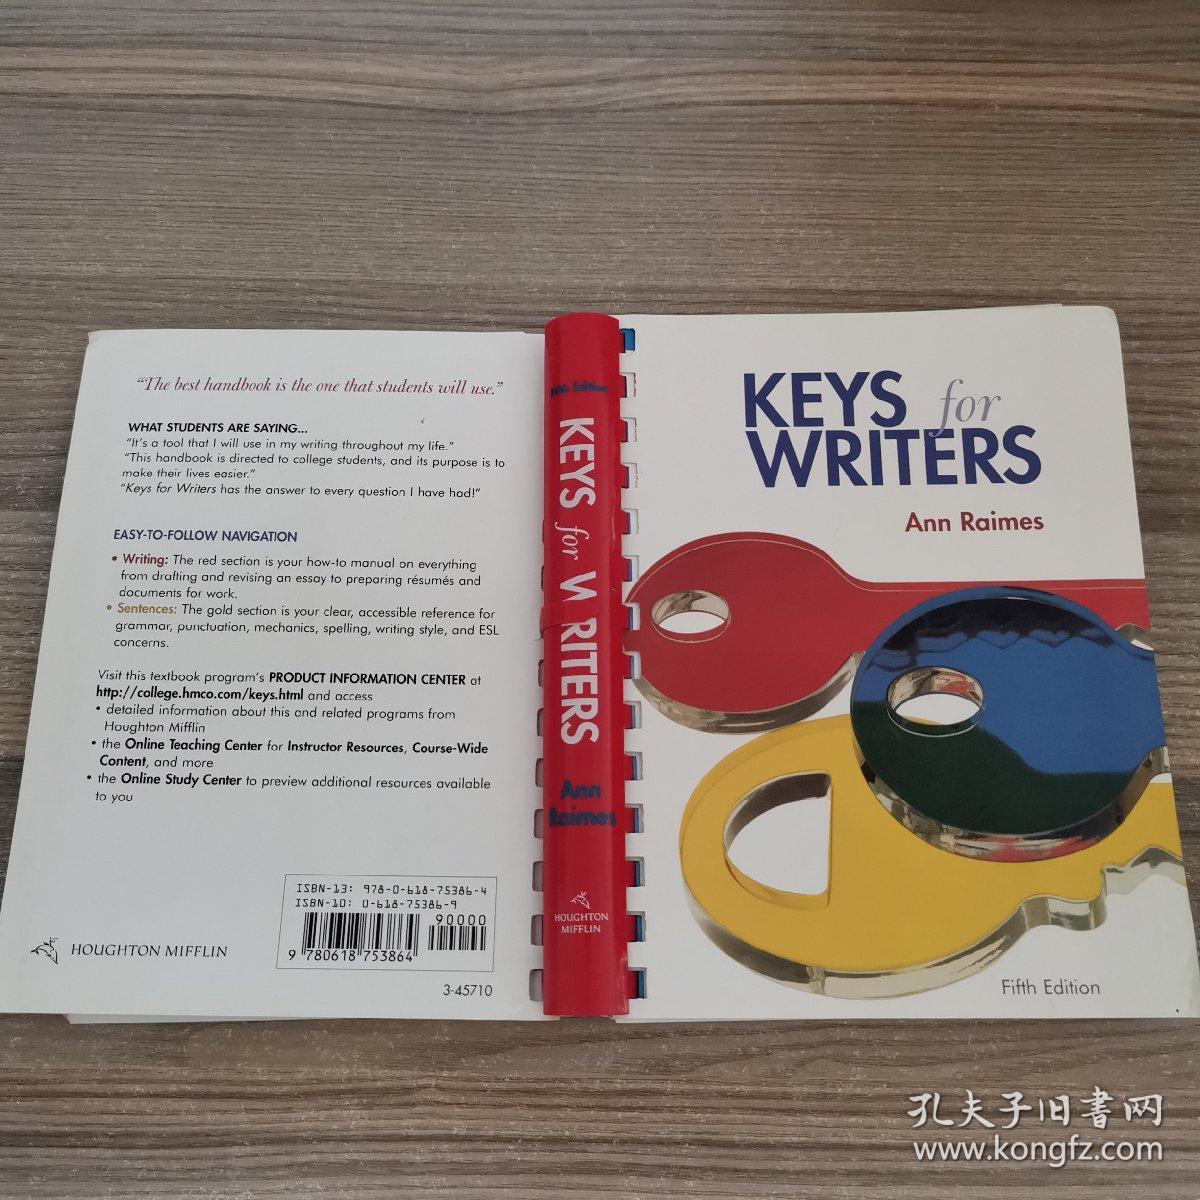 Keys for Writers (Fifth Edition)